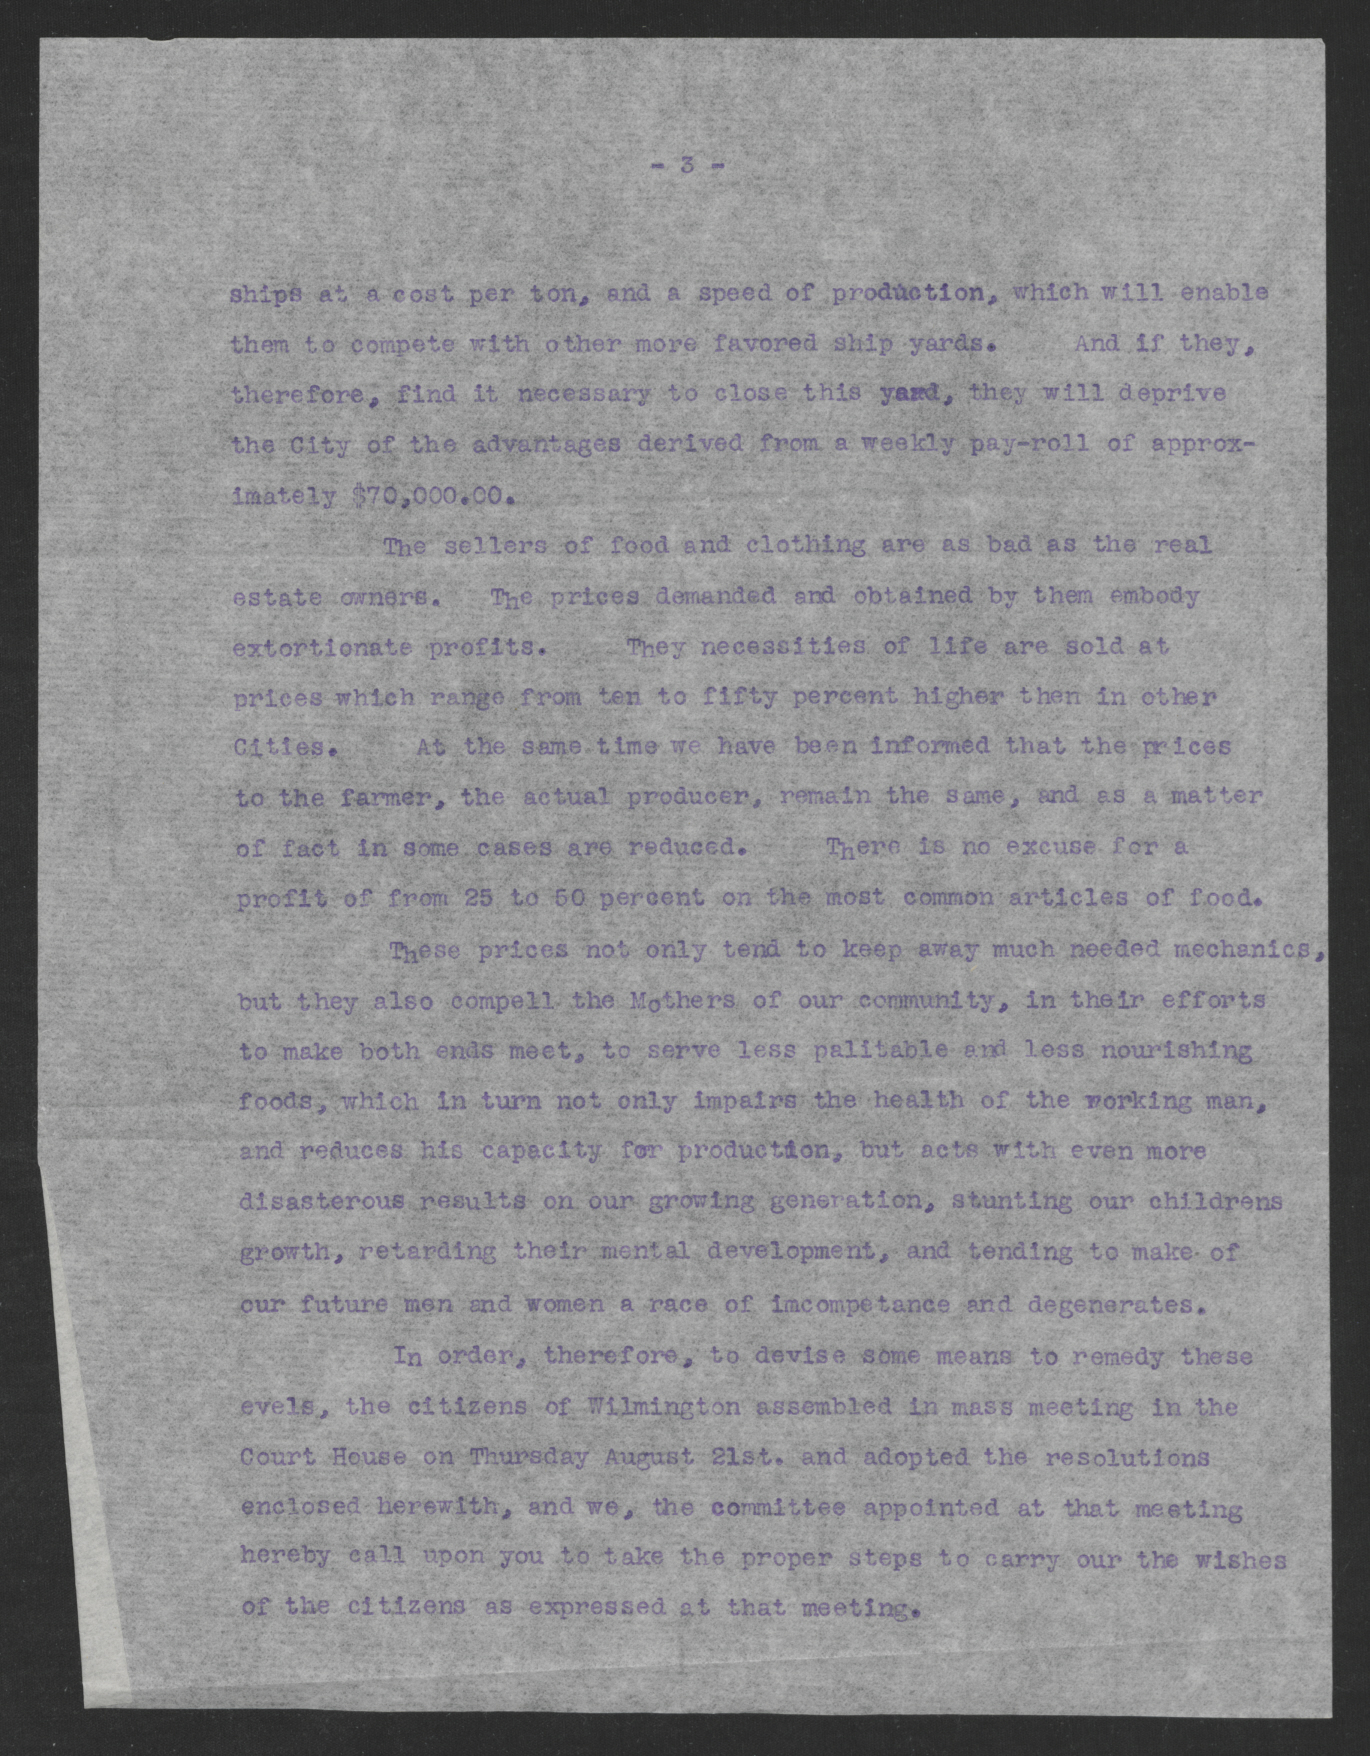 Letter from Citizens of Wilmington to Thomas W. Bickett, August 22, 1919, page 3